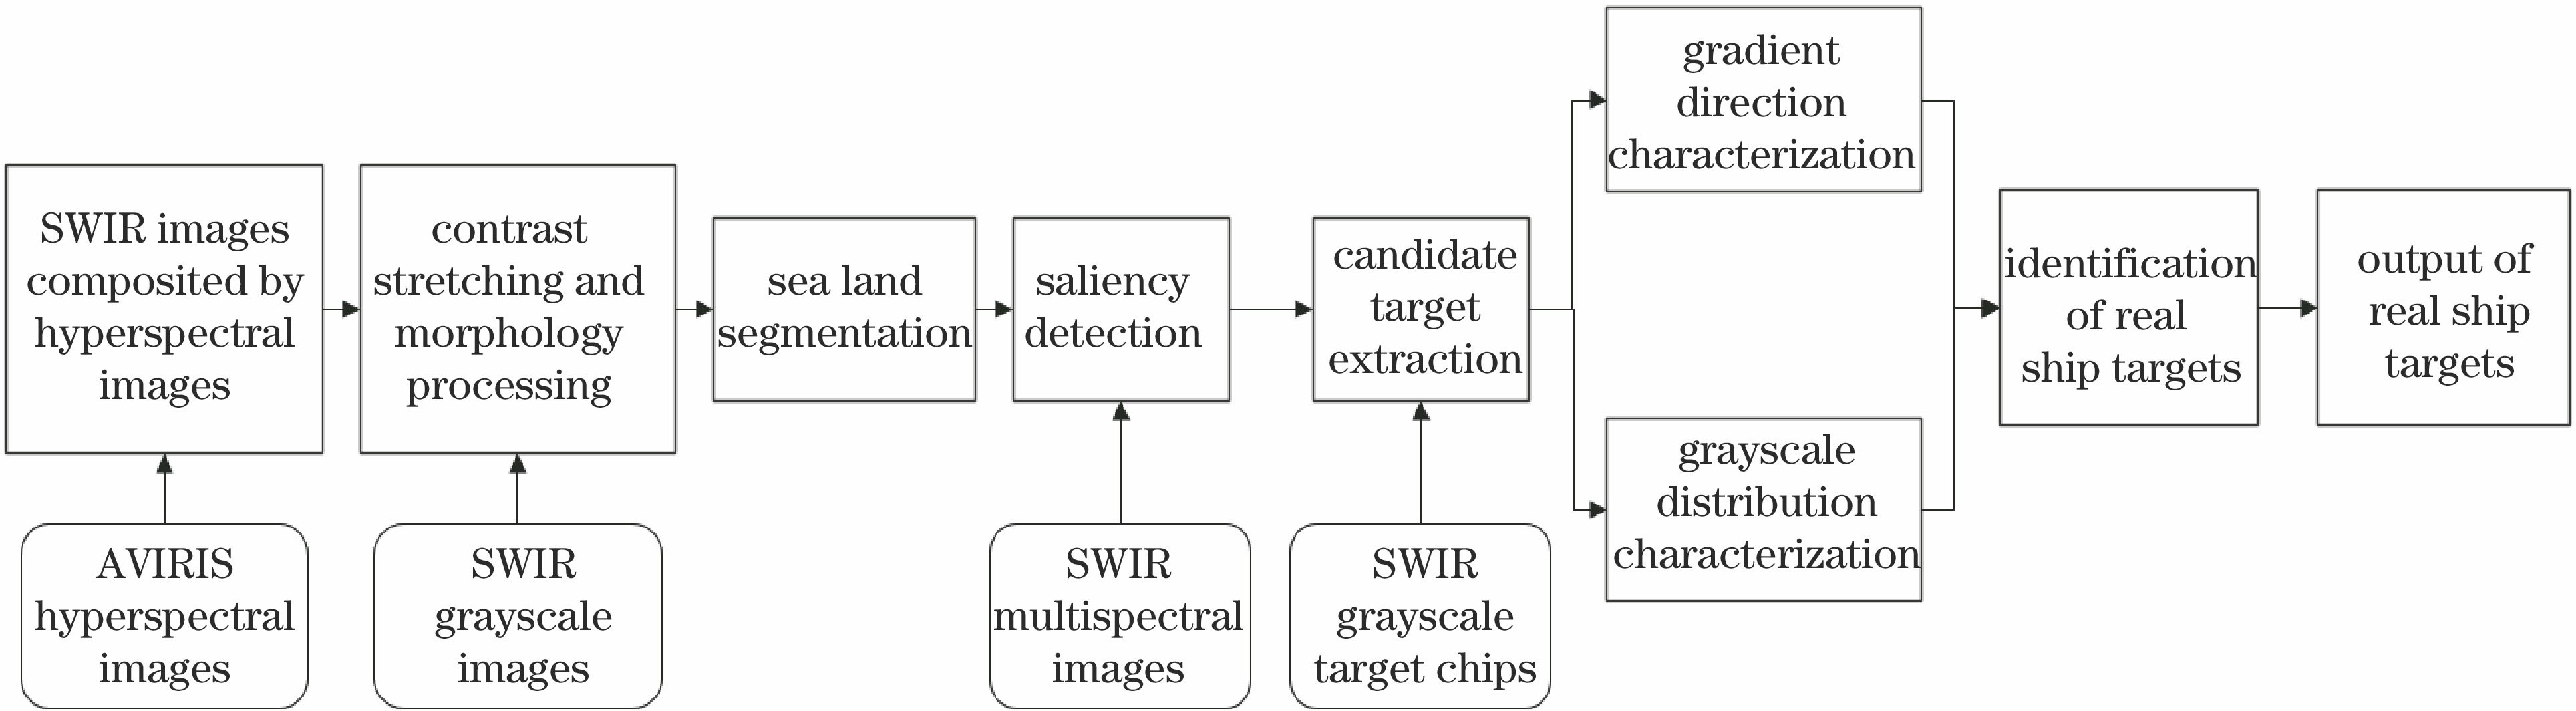 Flow chart of automatic detection method of ships based on SWIR images